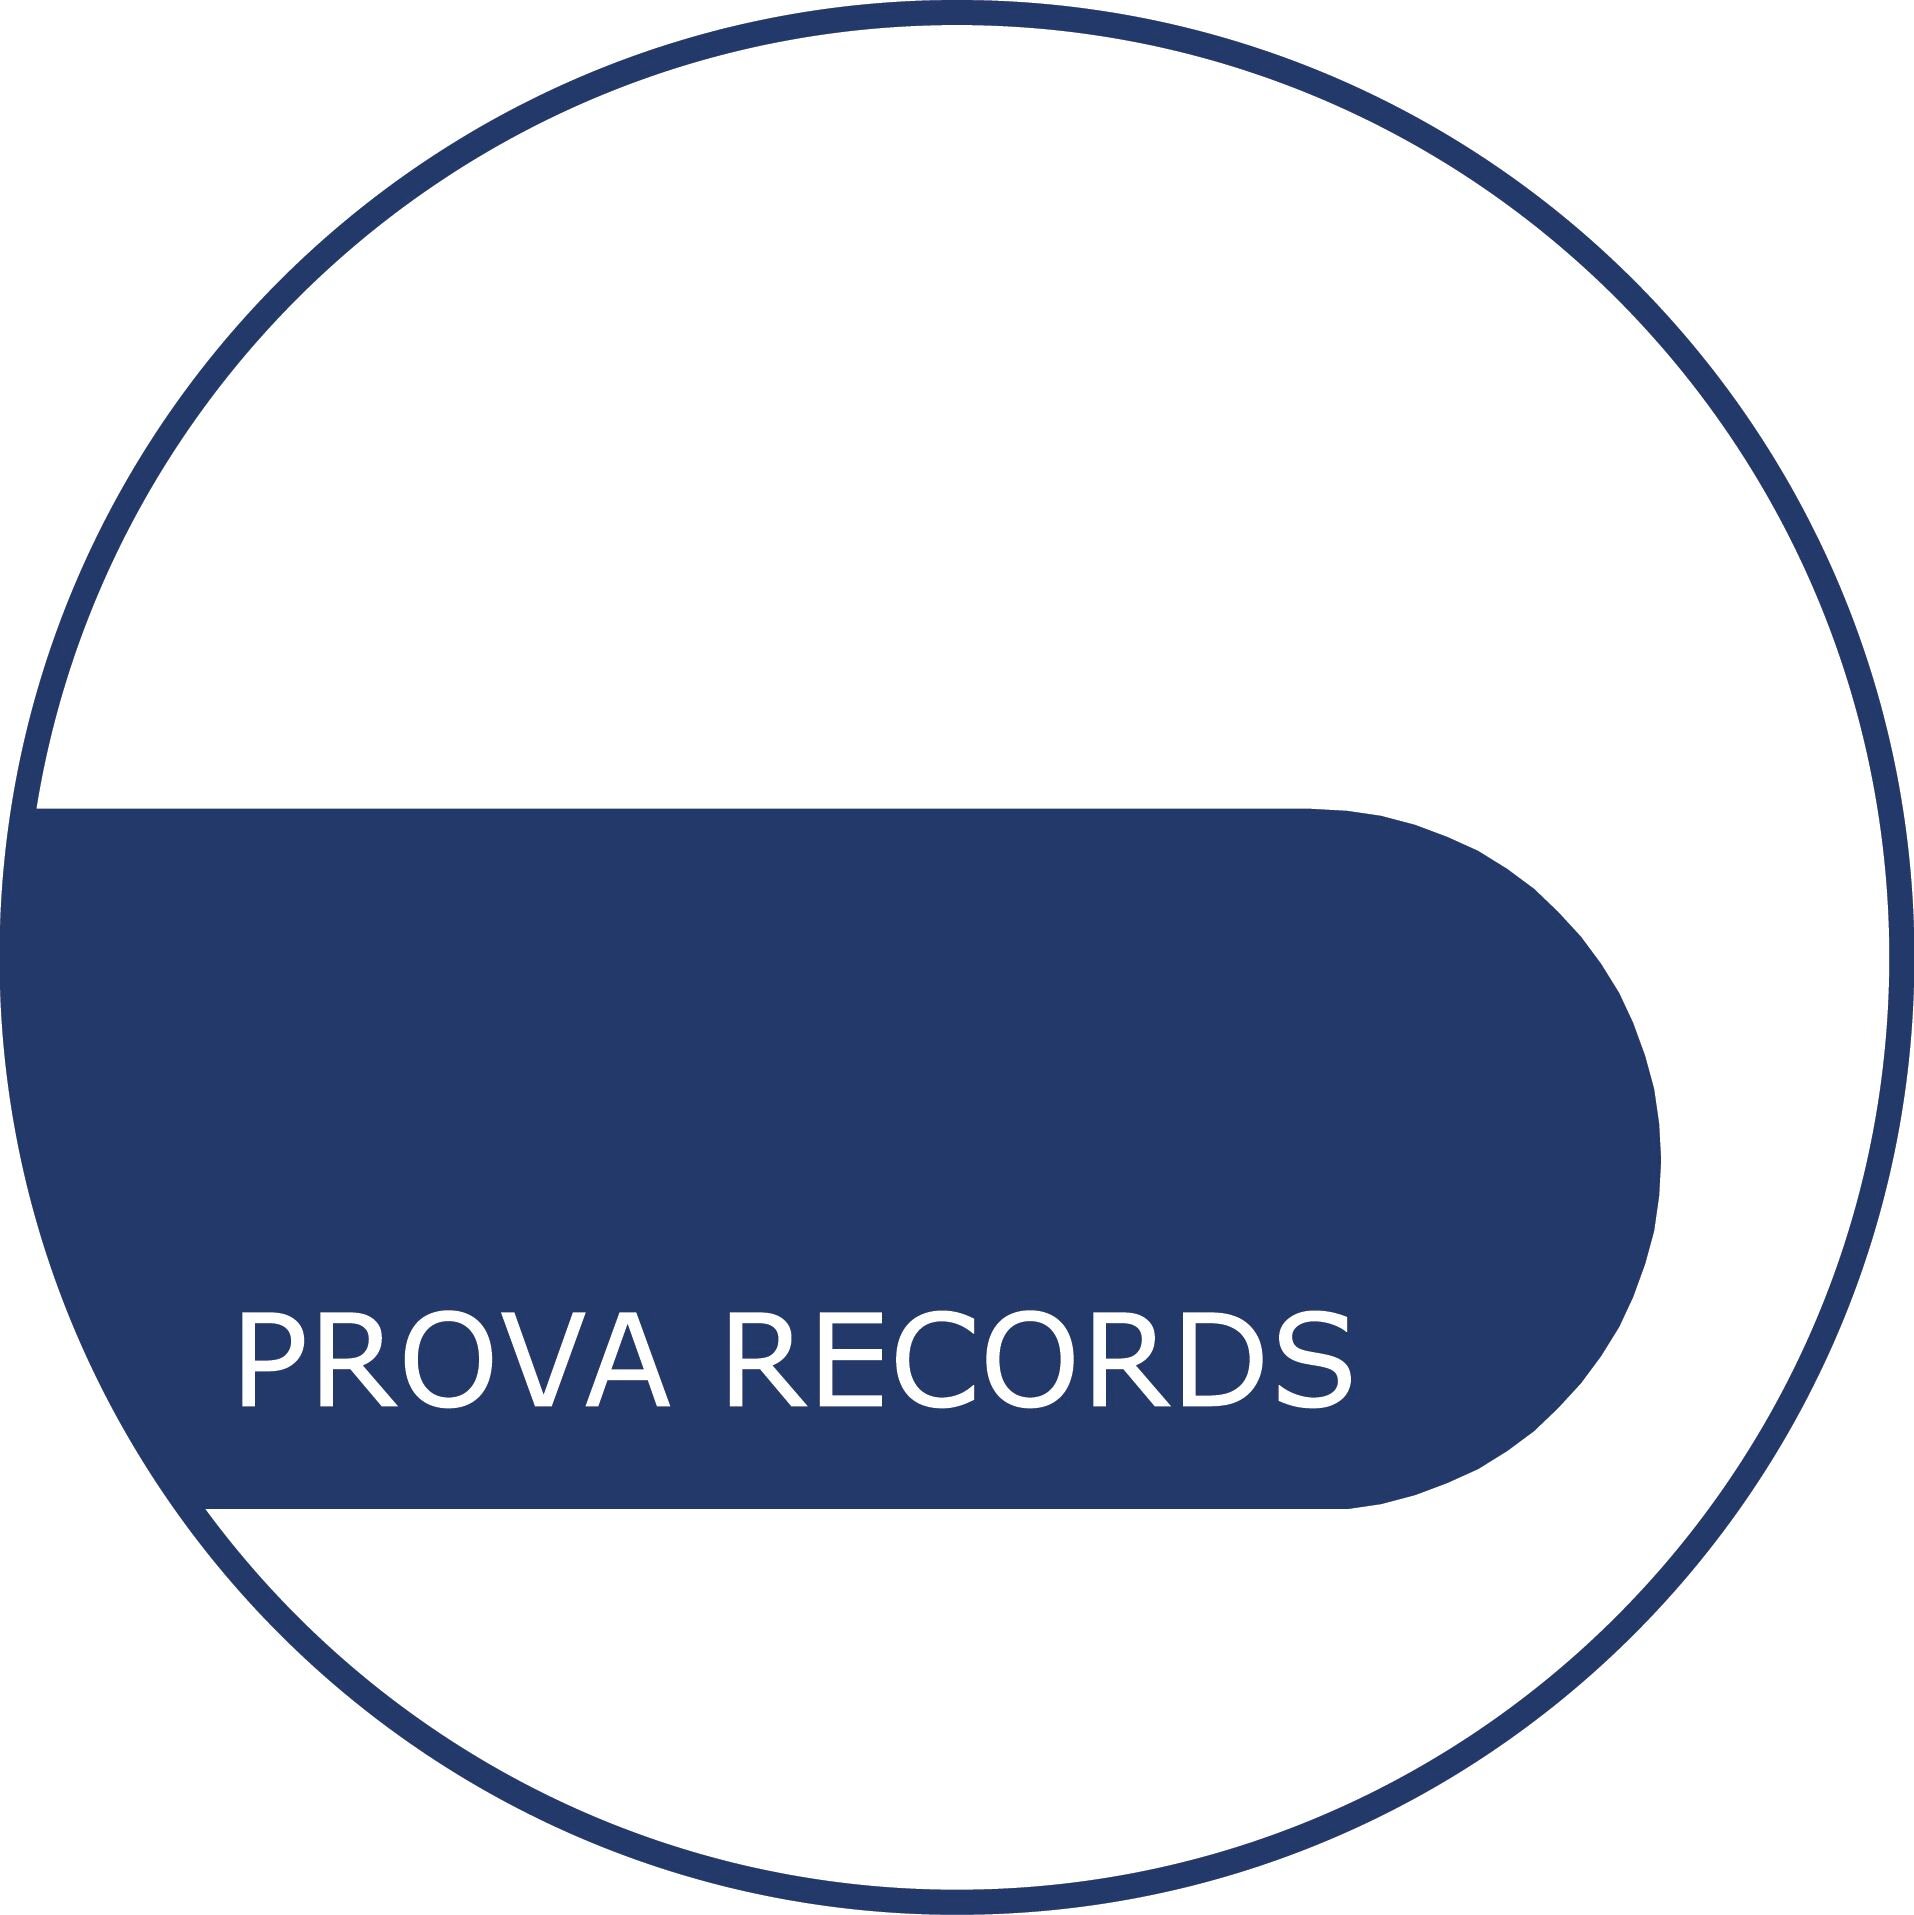 Prova Records is an independent Belgian record label. We mainly represent leading national artists, and offer a well-balanced collection of quality recordings.